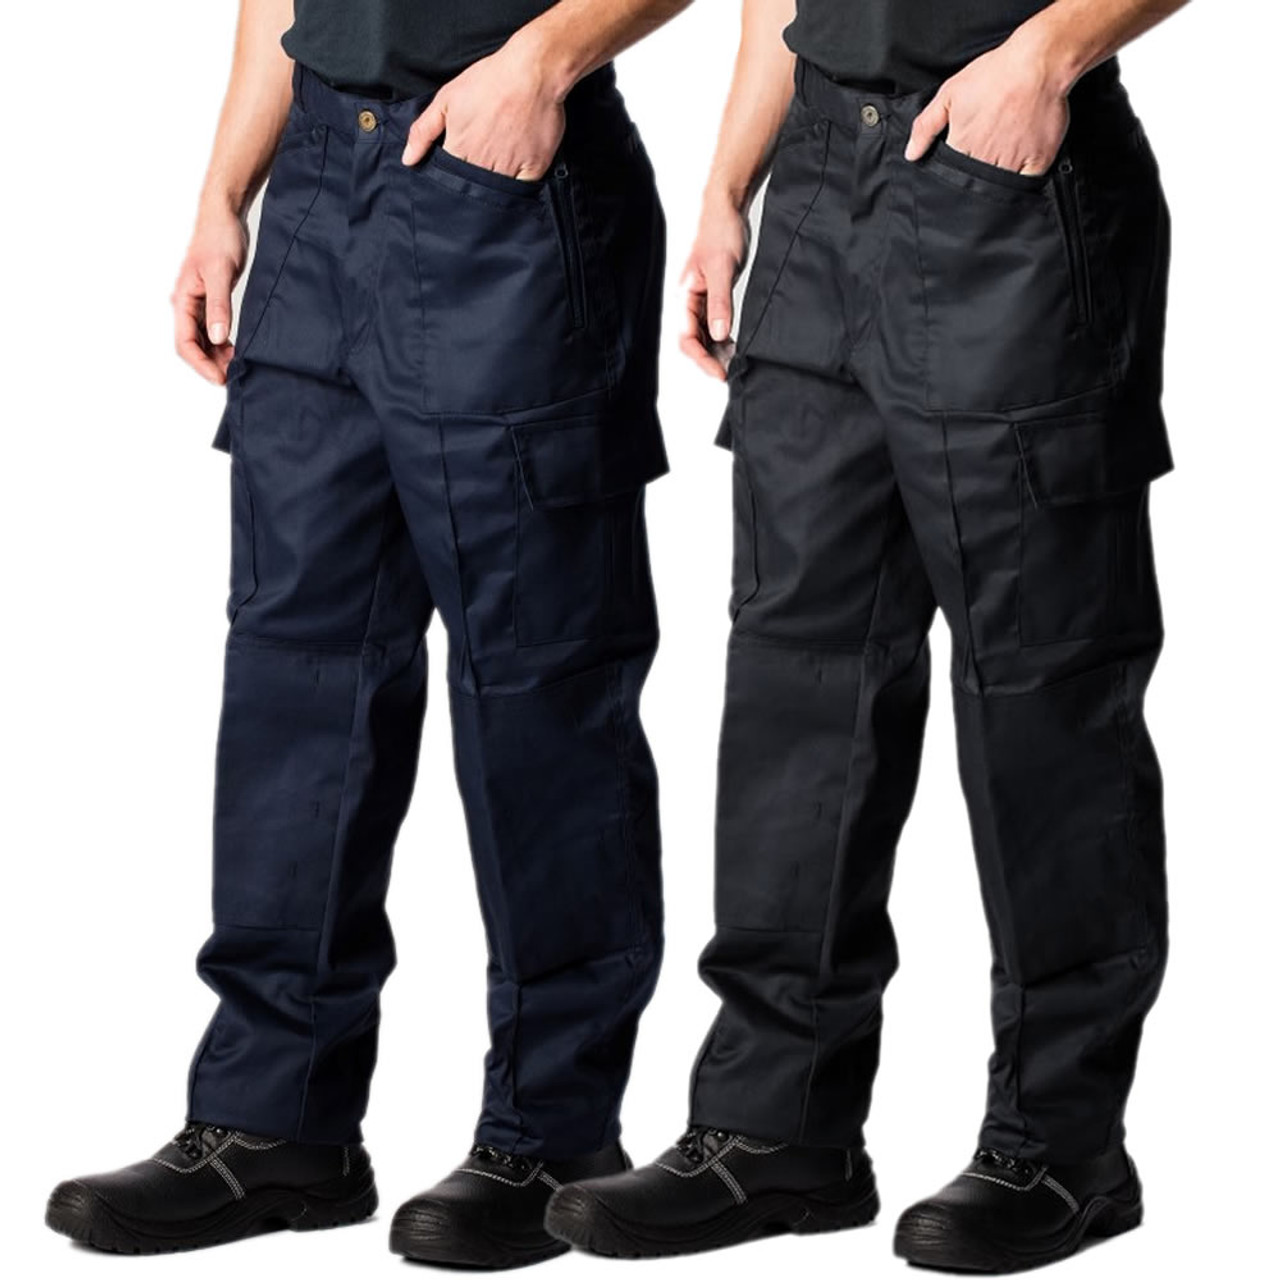 Cargo Trousers by UNEEK UC903  Regular or Long  Black or Navy Action  Workwear  eBay